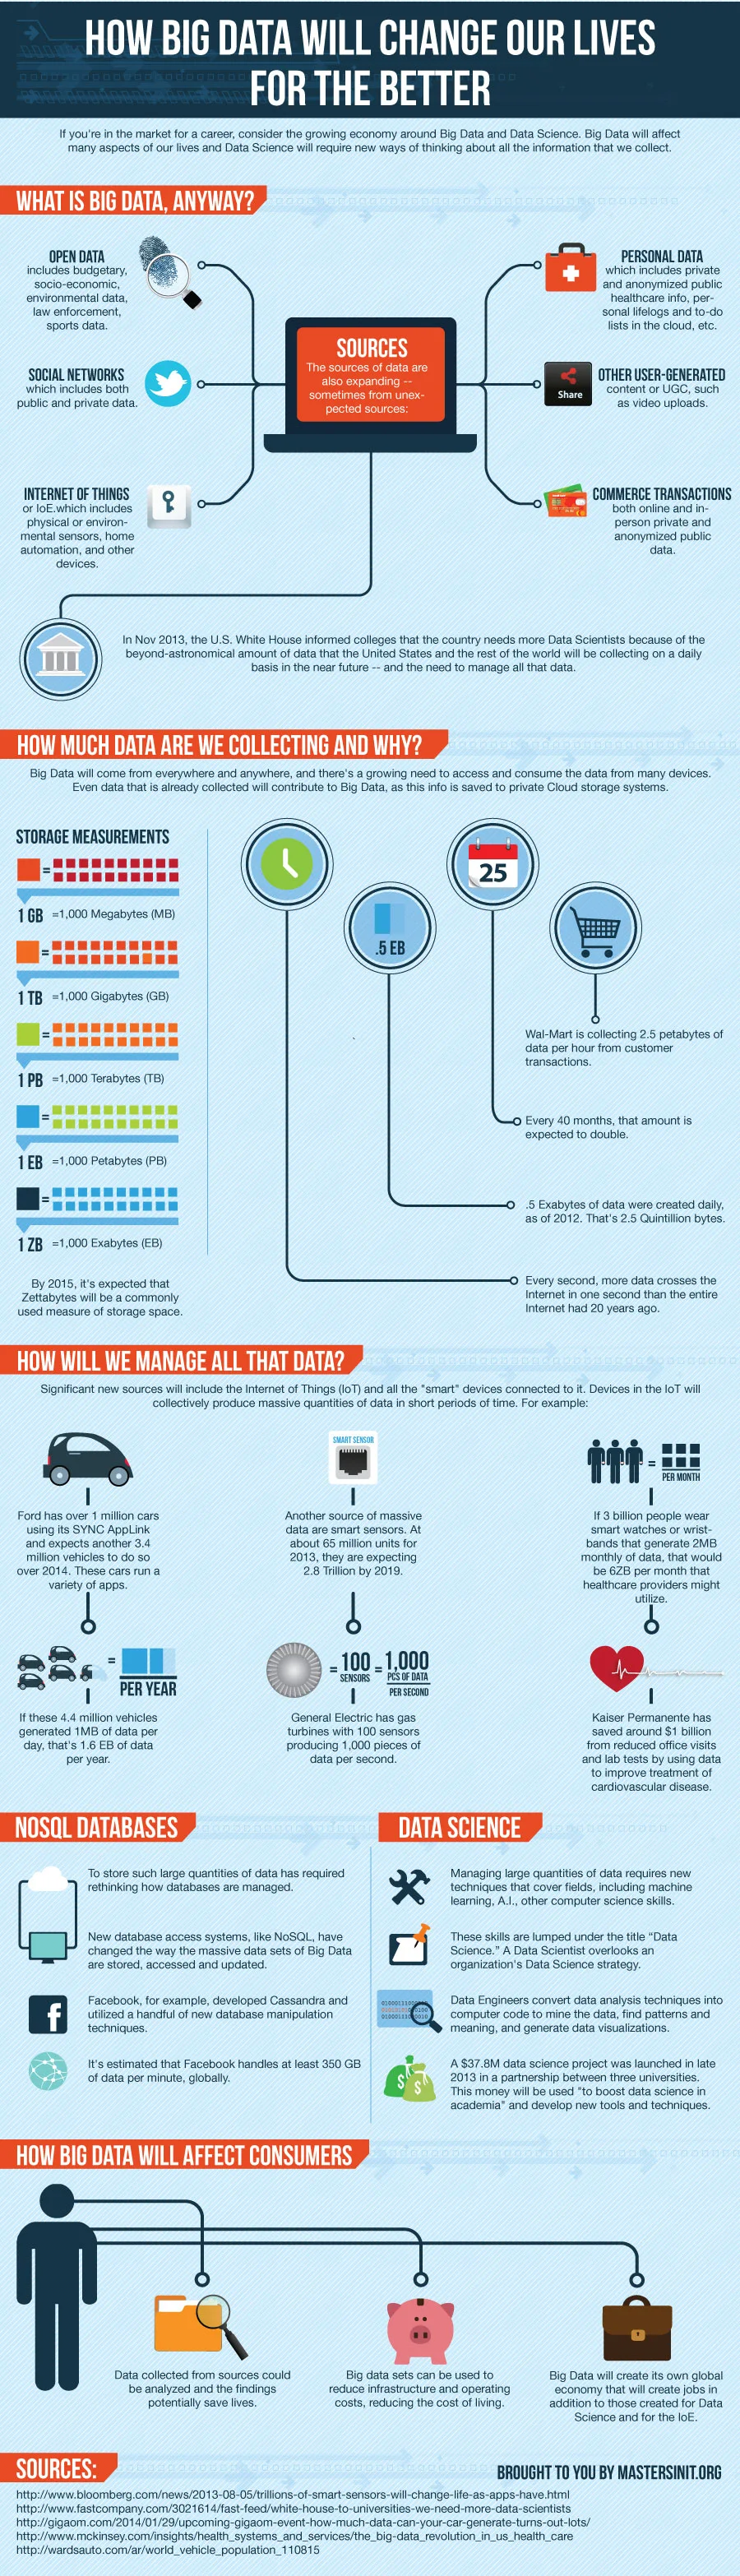 How Big Data Will Change Our Lives For The Better - infographic